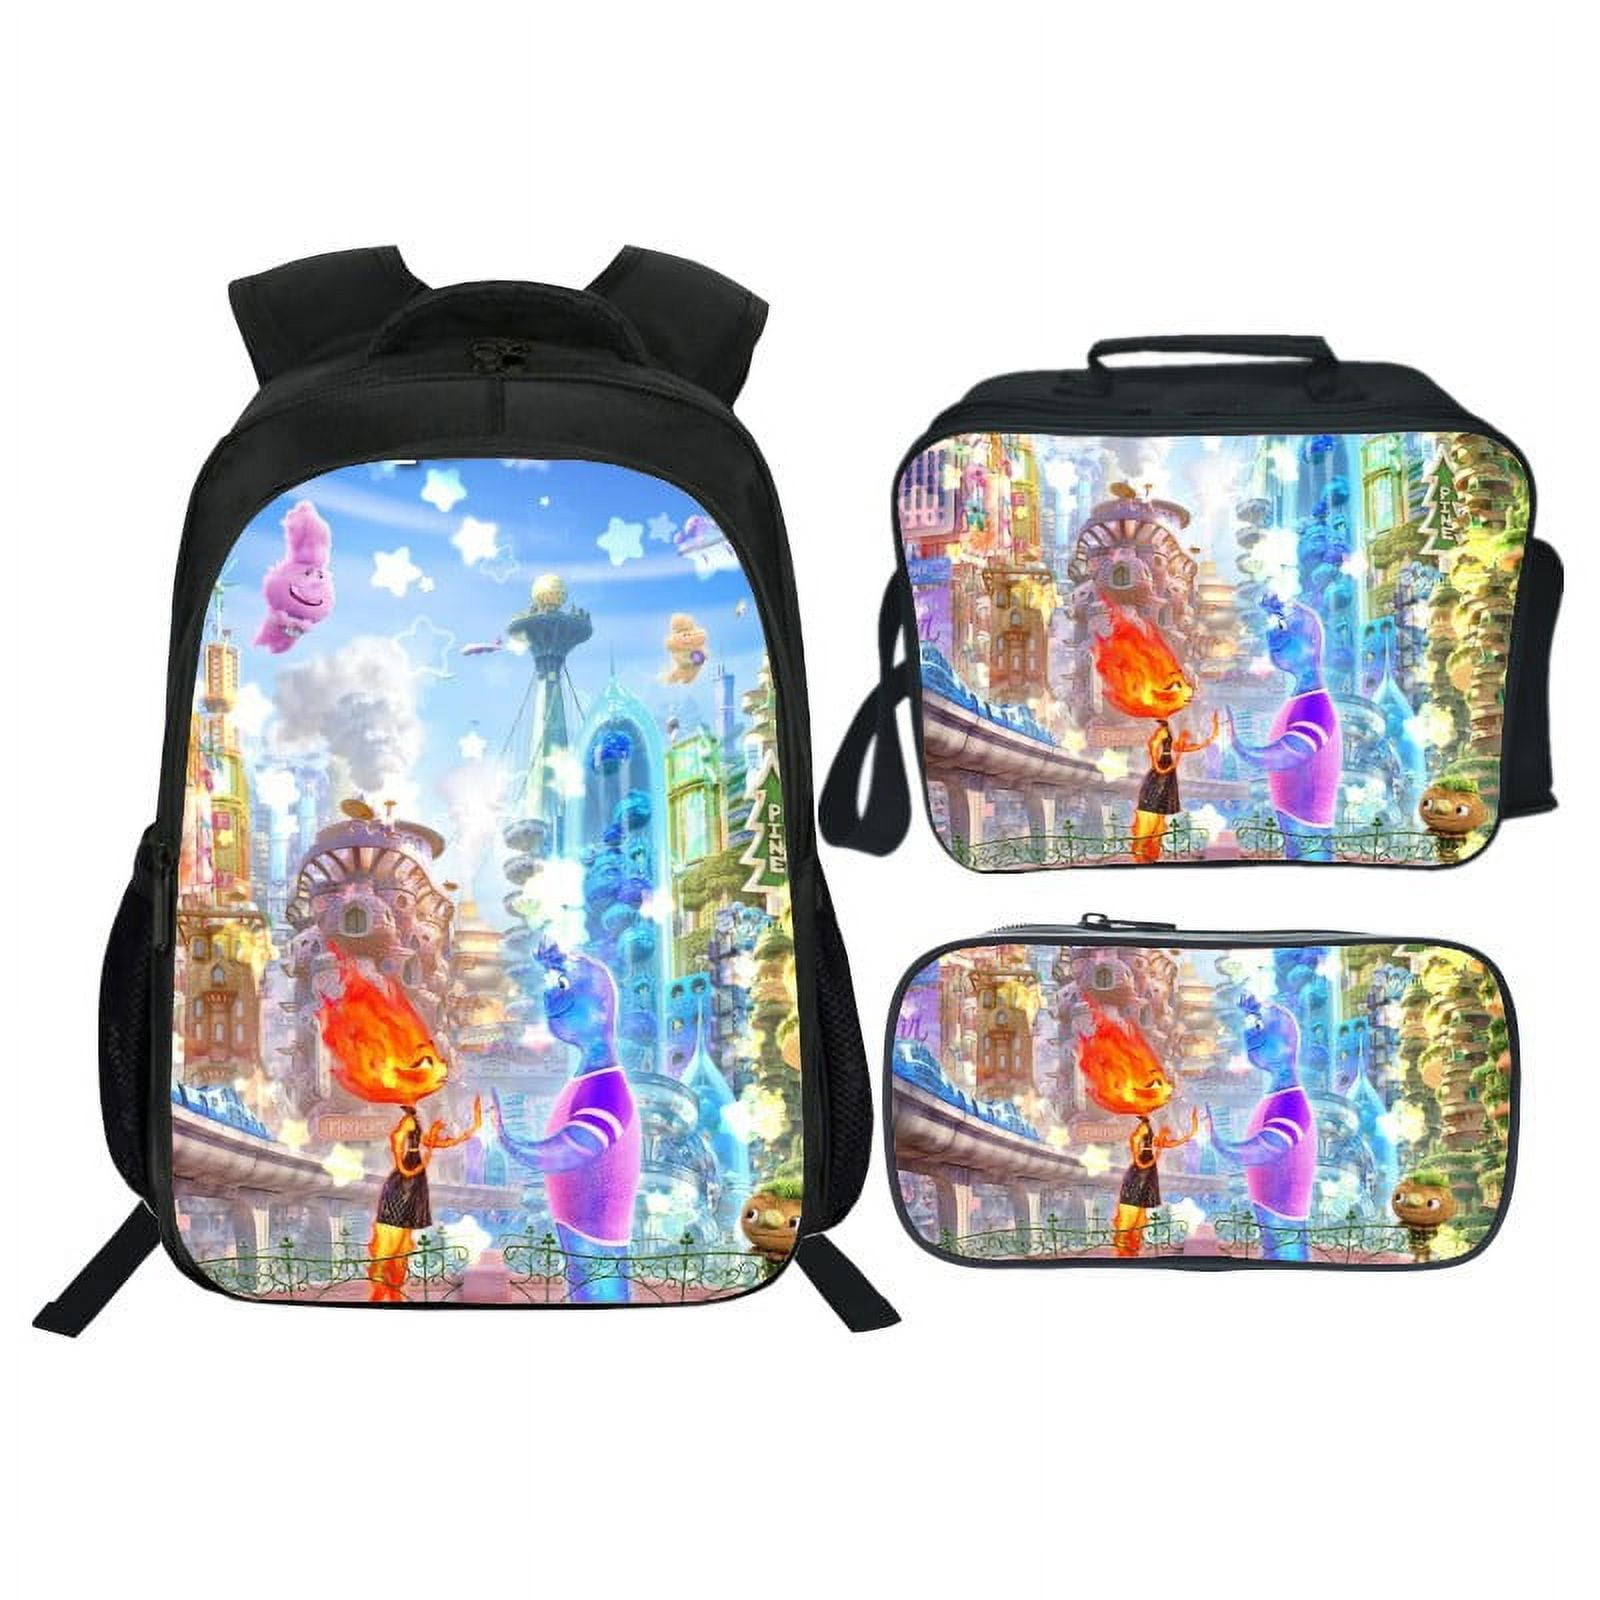 I hate school pencil case/backpack Backpack by kruzzles